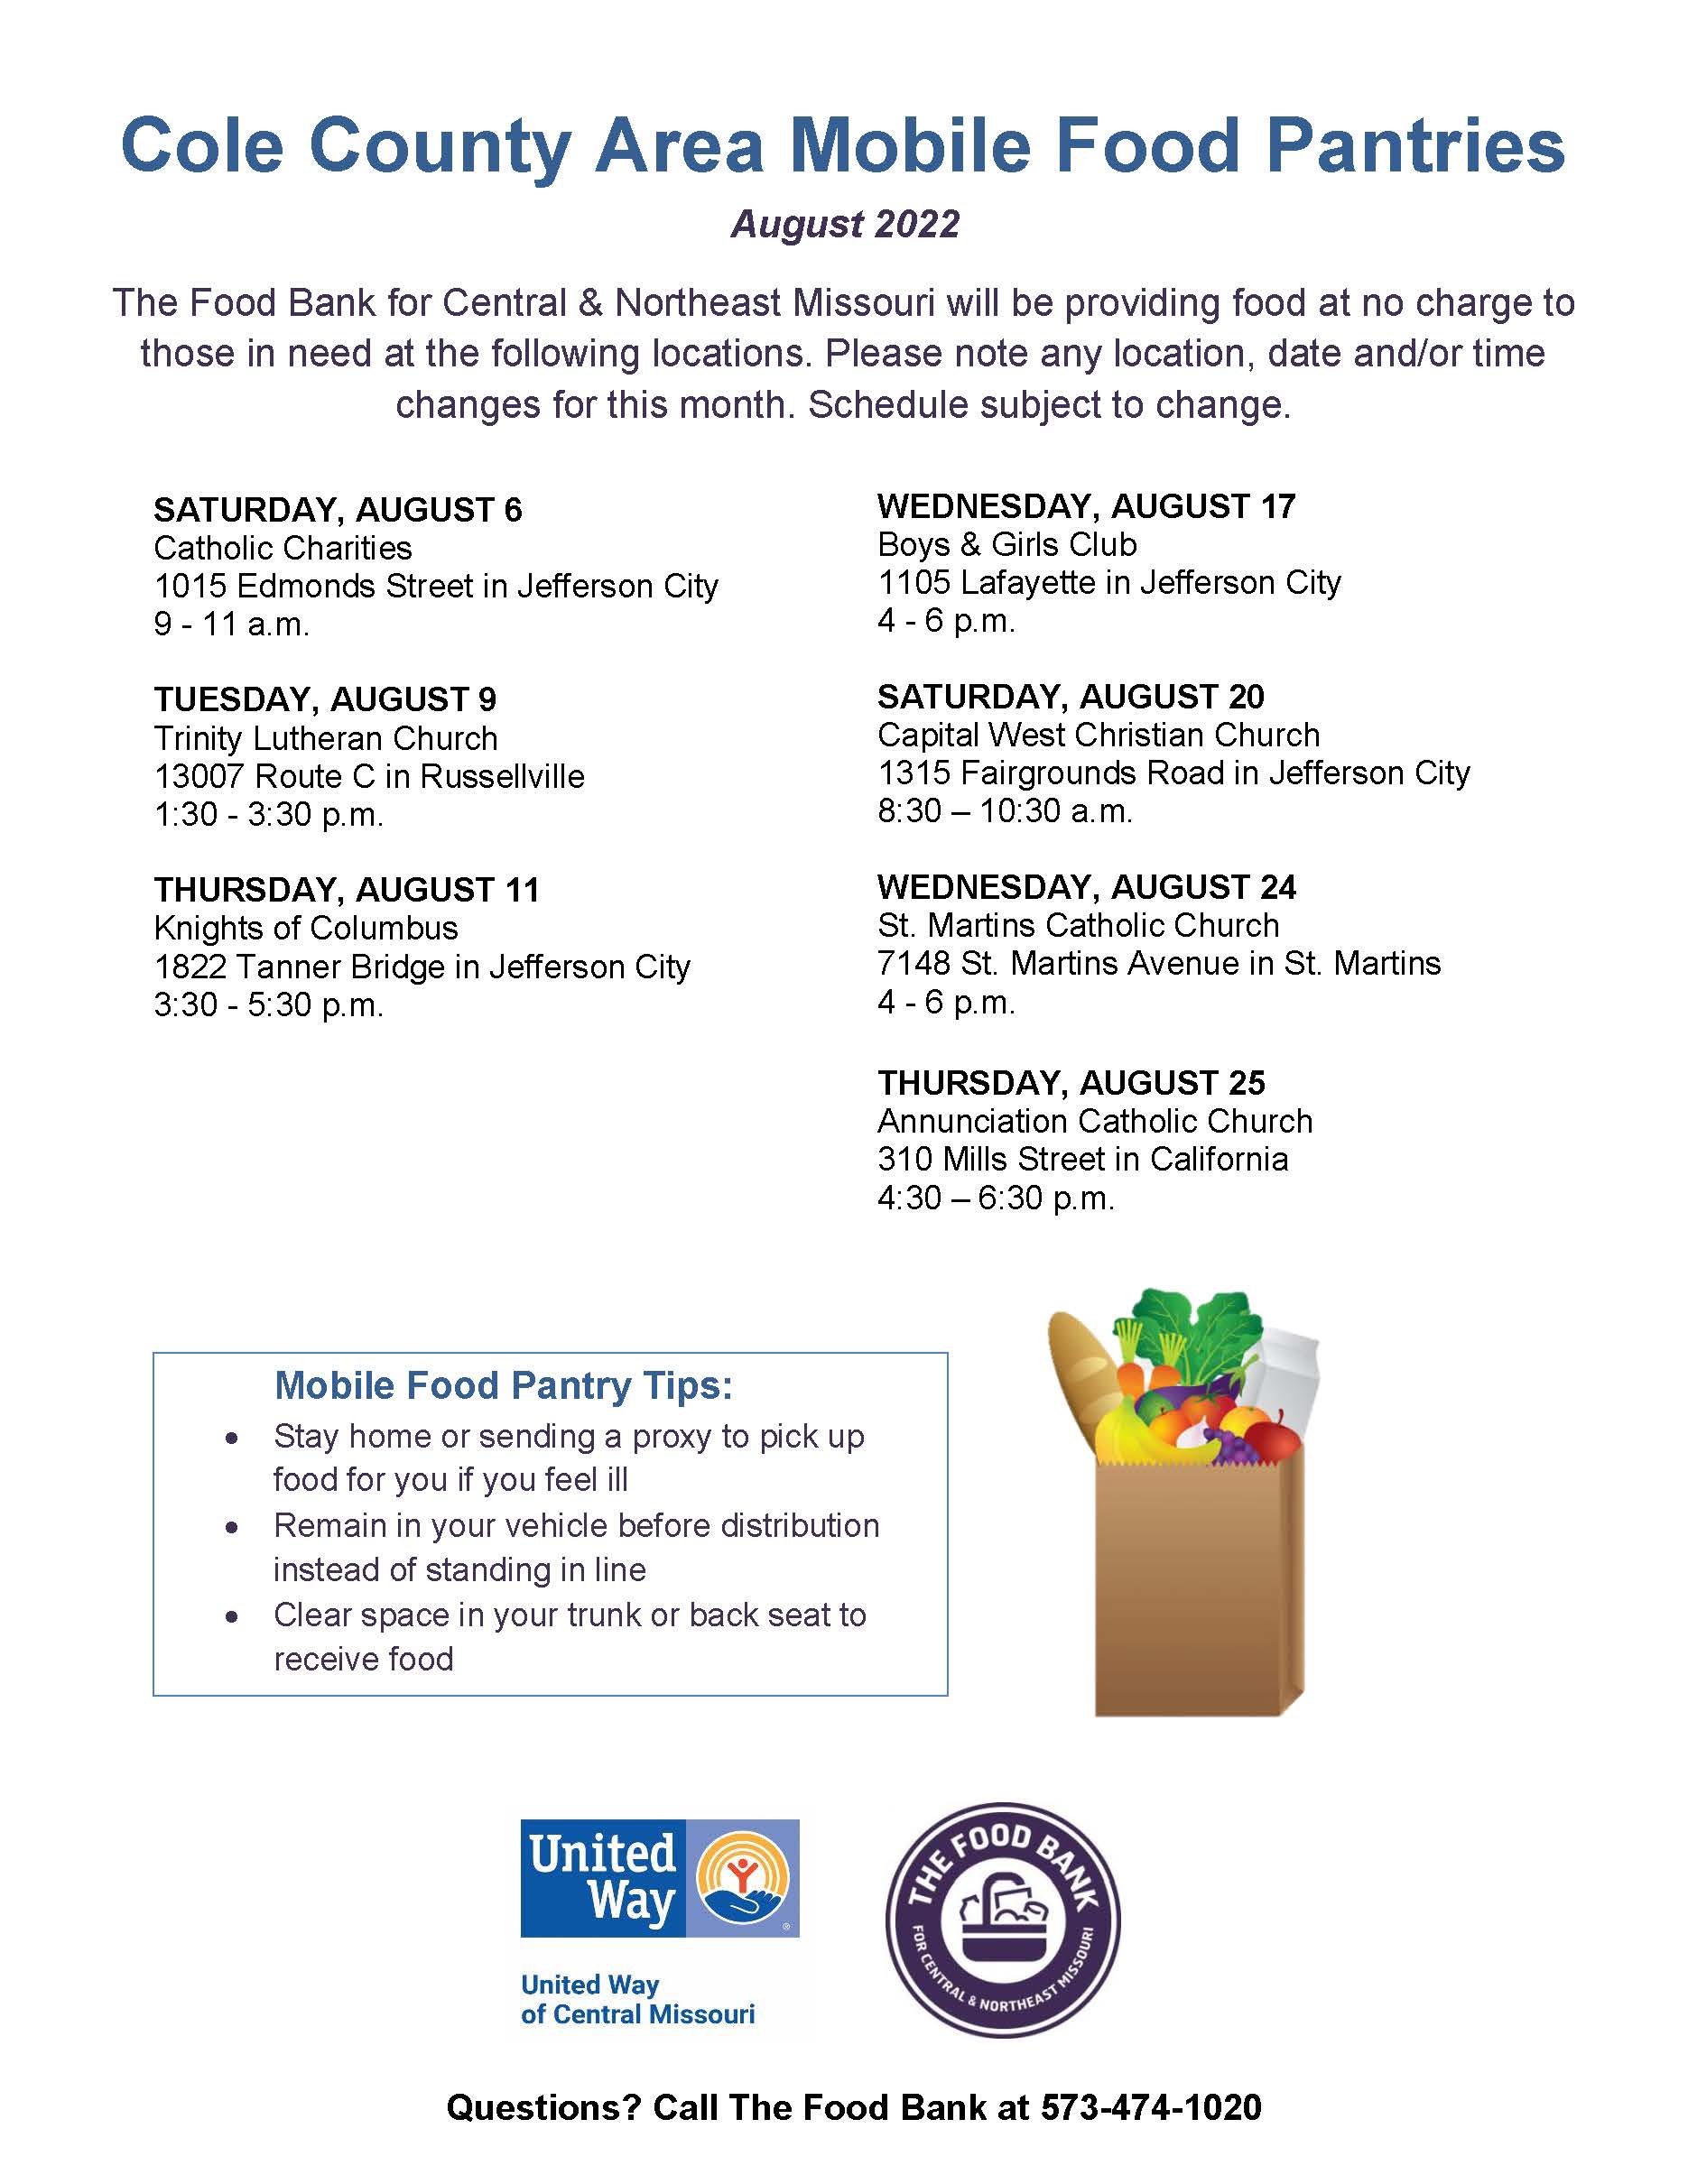 Mobile Food Pantry @ Trinity Lutheran Church from 1:30 - 3:30 pm